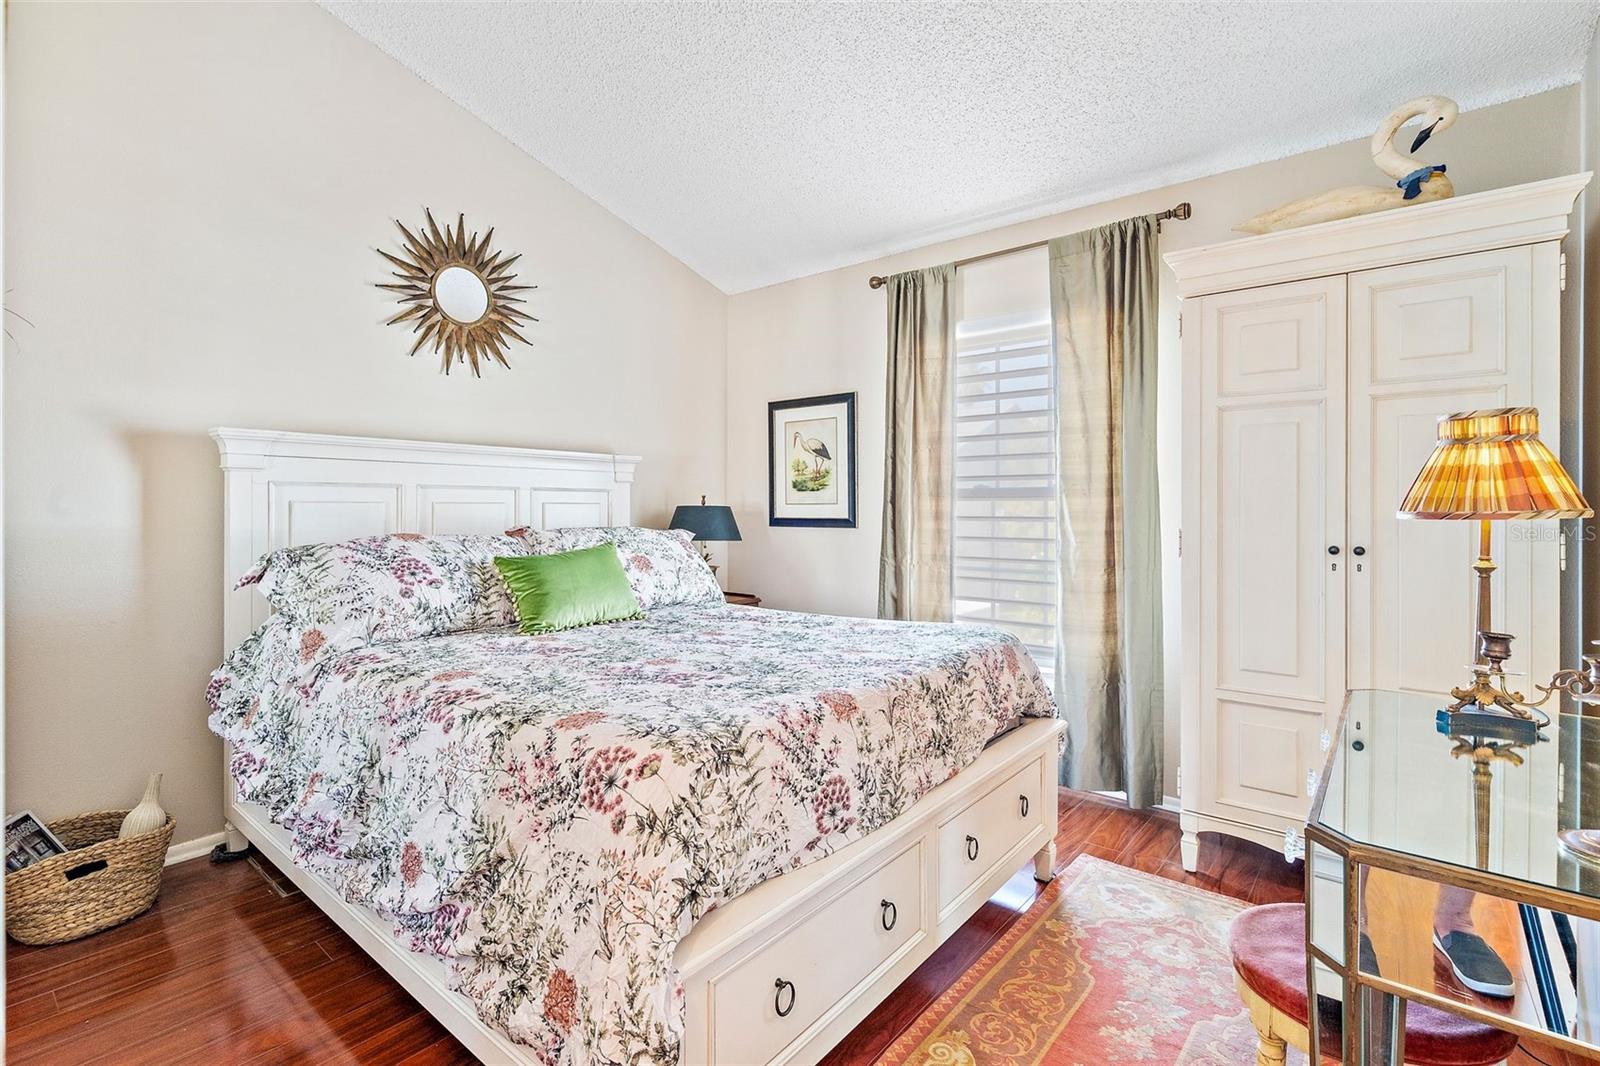 Guest Bedroom is Roomy and is Located Just Next to the Guest Bath